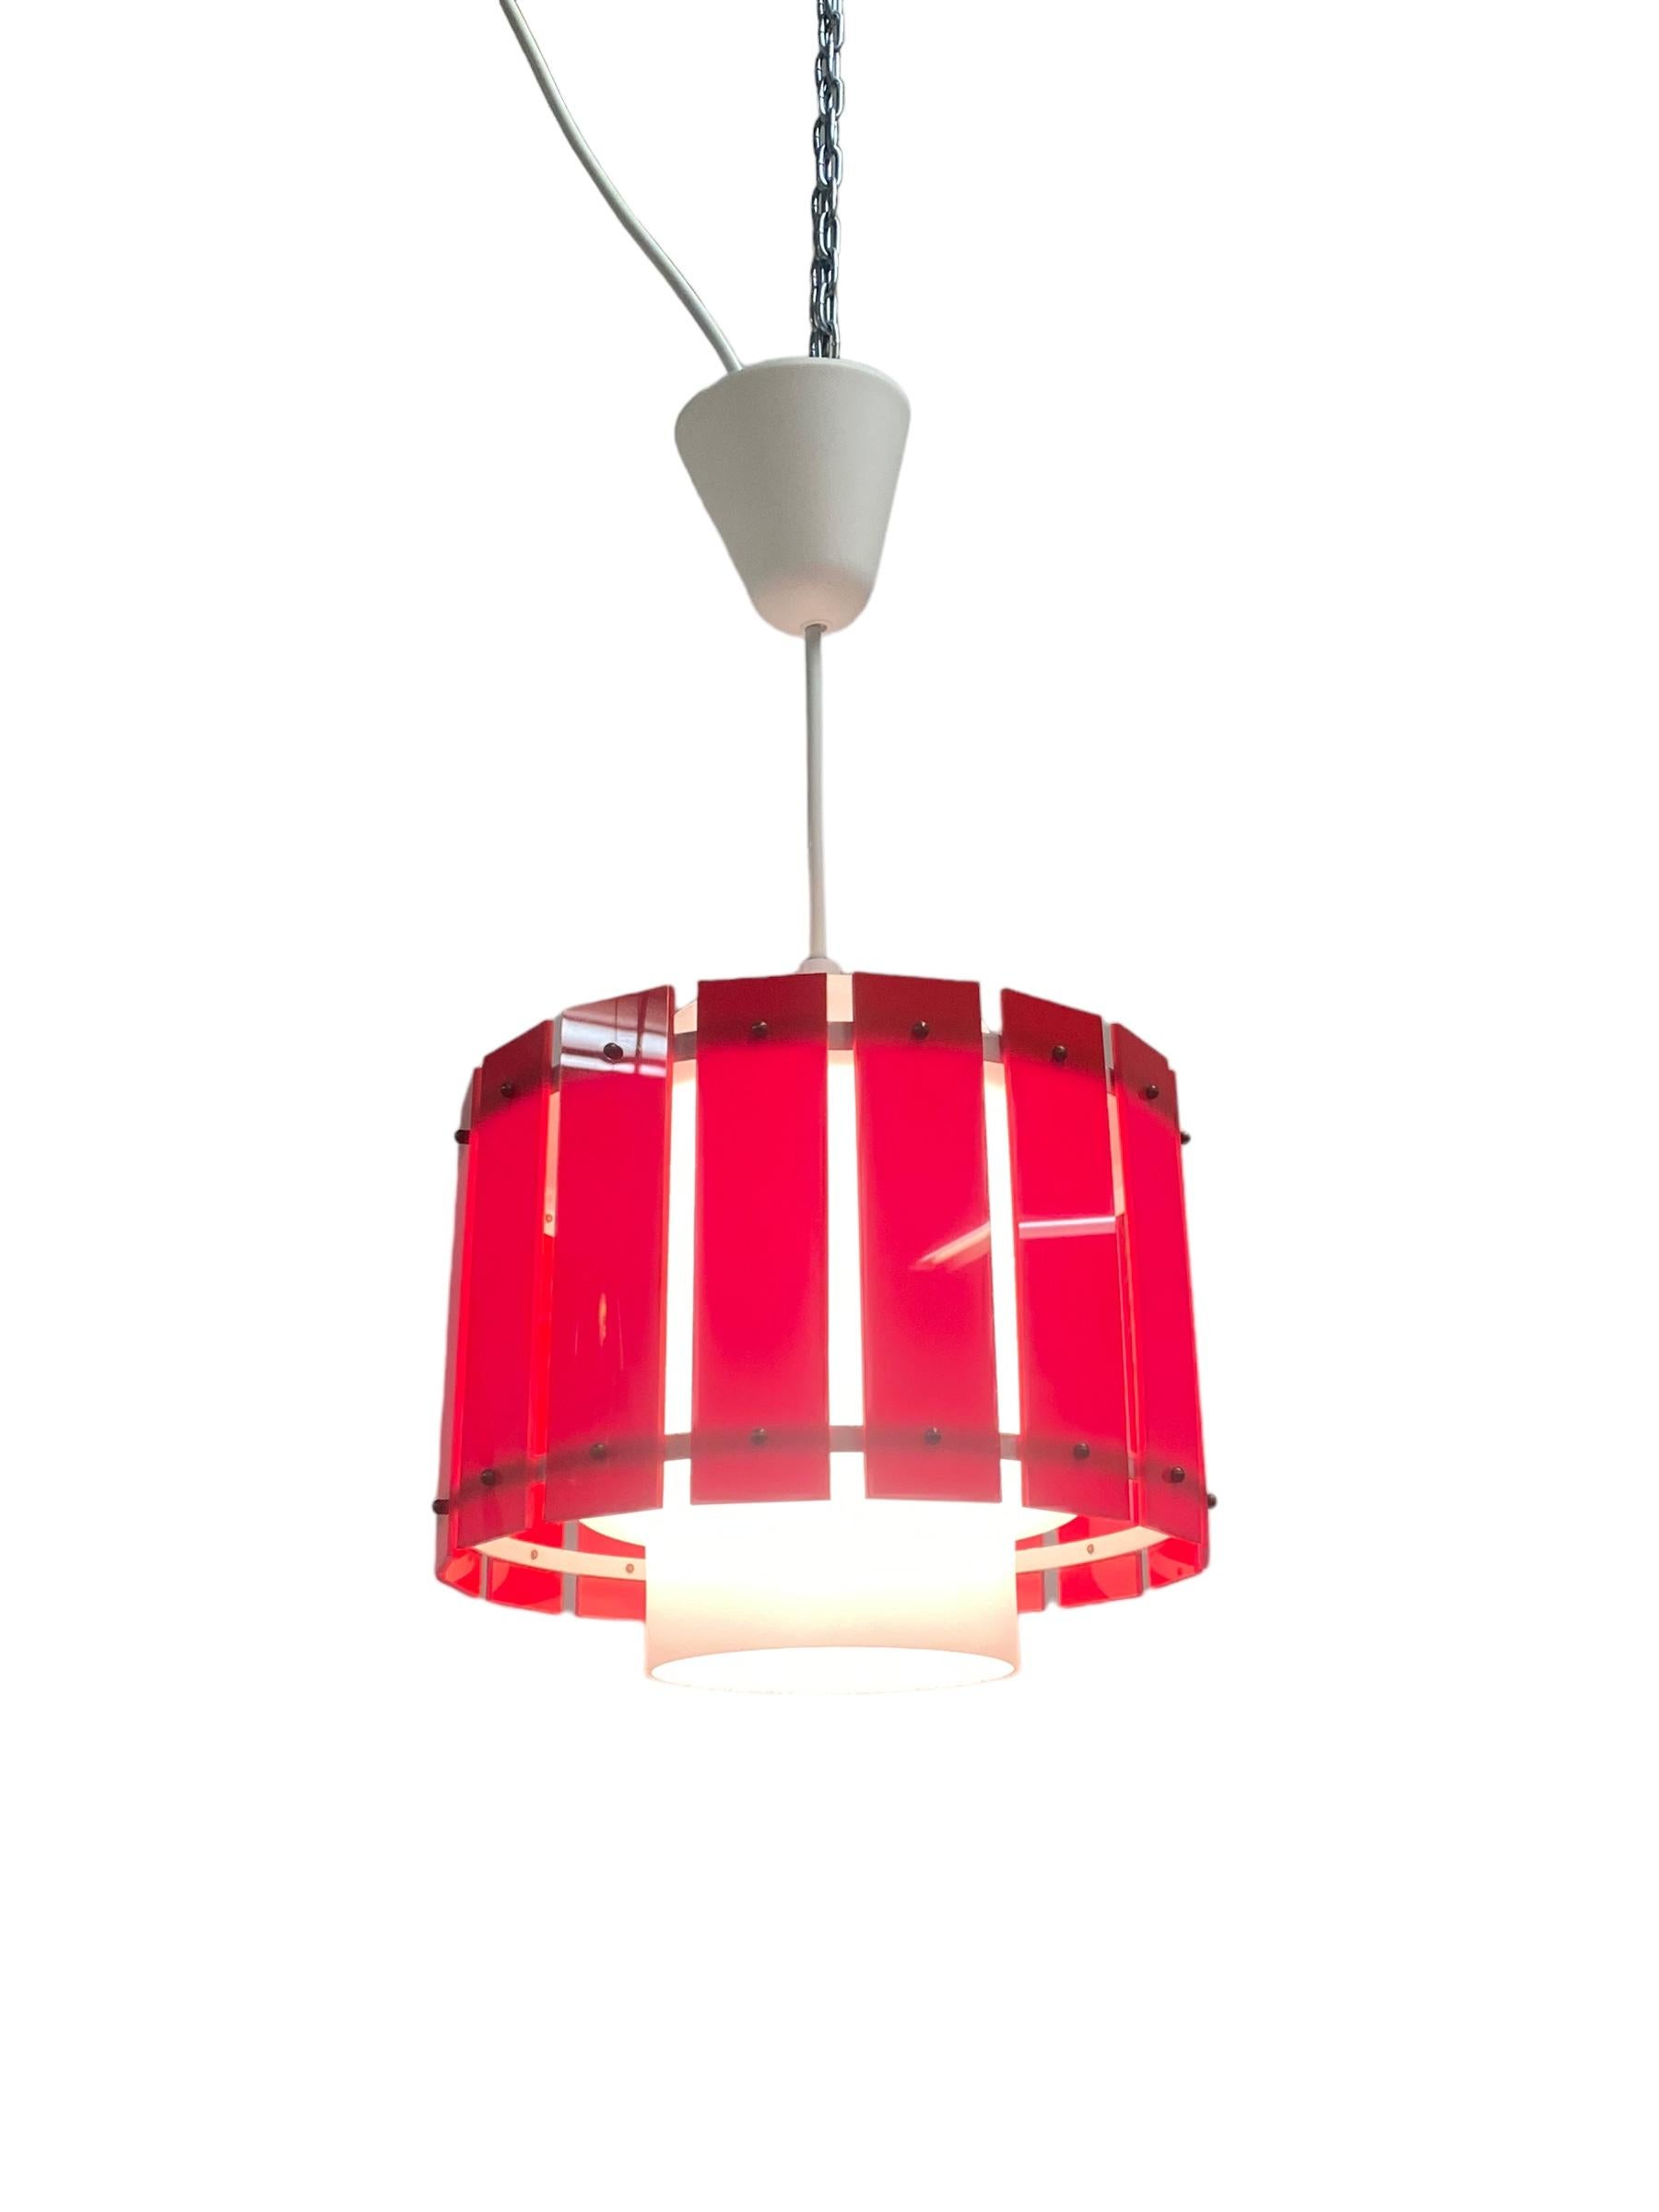 Scandinavian Modern A Red Ceiling Pendant Model K2-47 by Maria Lindeman, 1960s For Sale